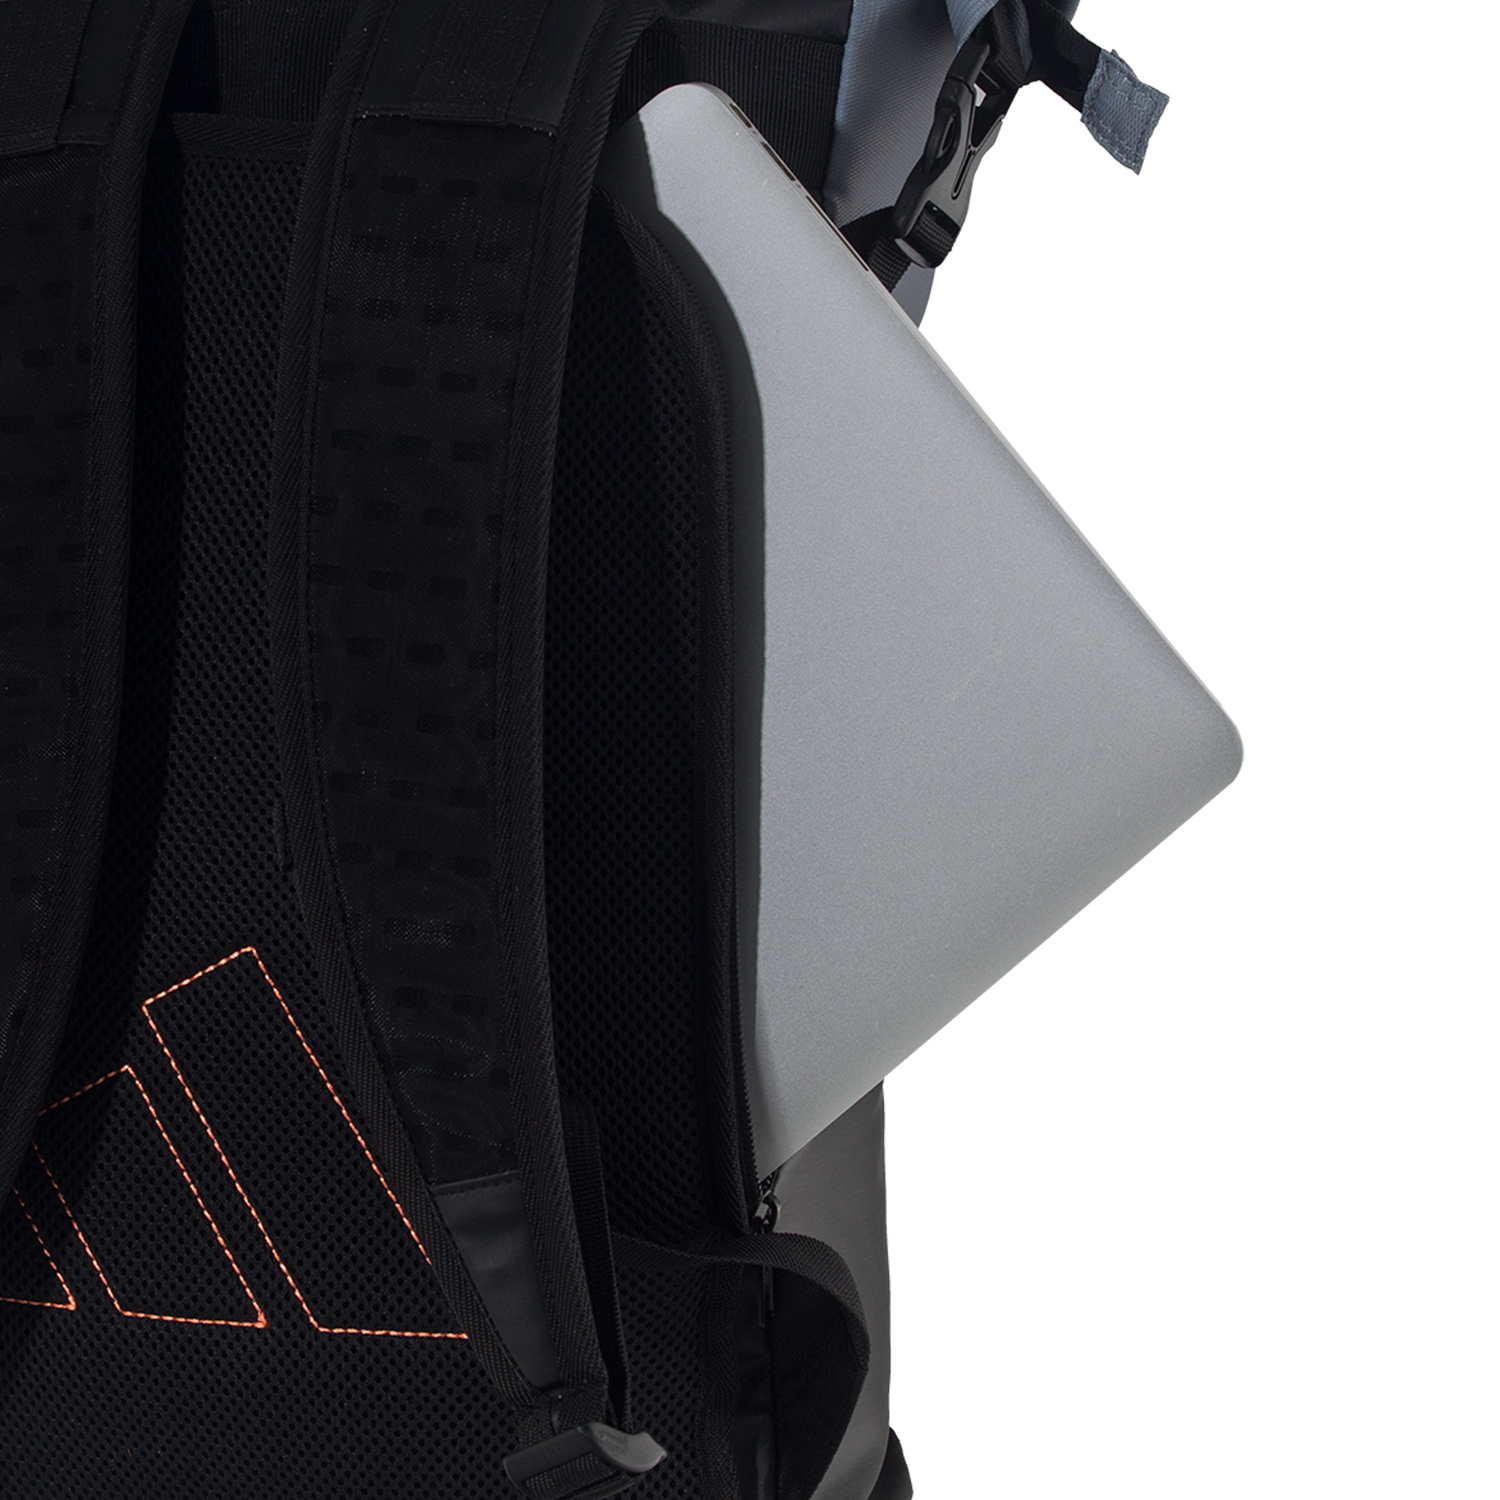 adidas Multigame Backpack - Anthracite